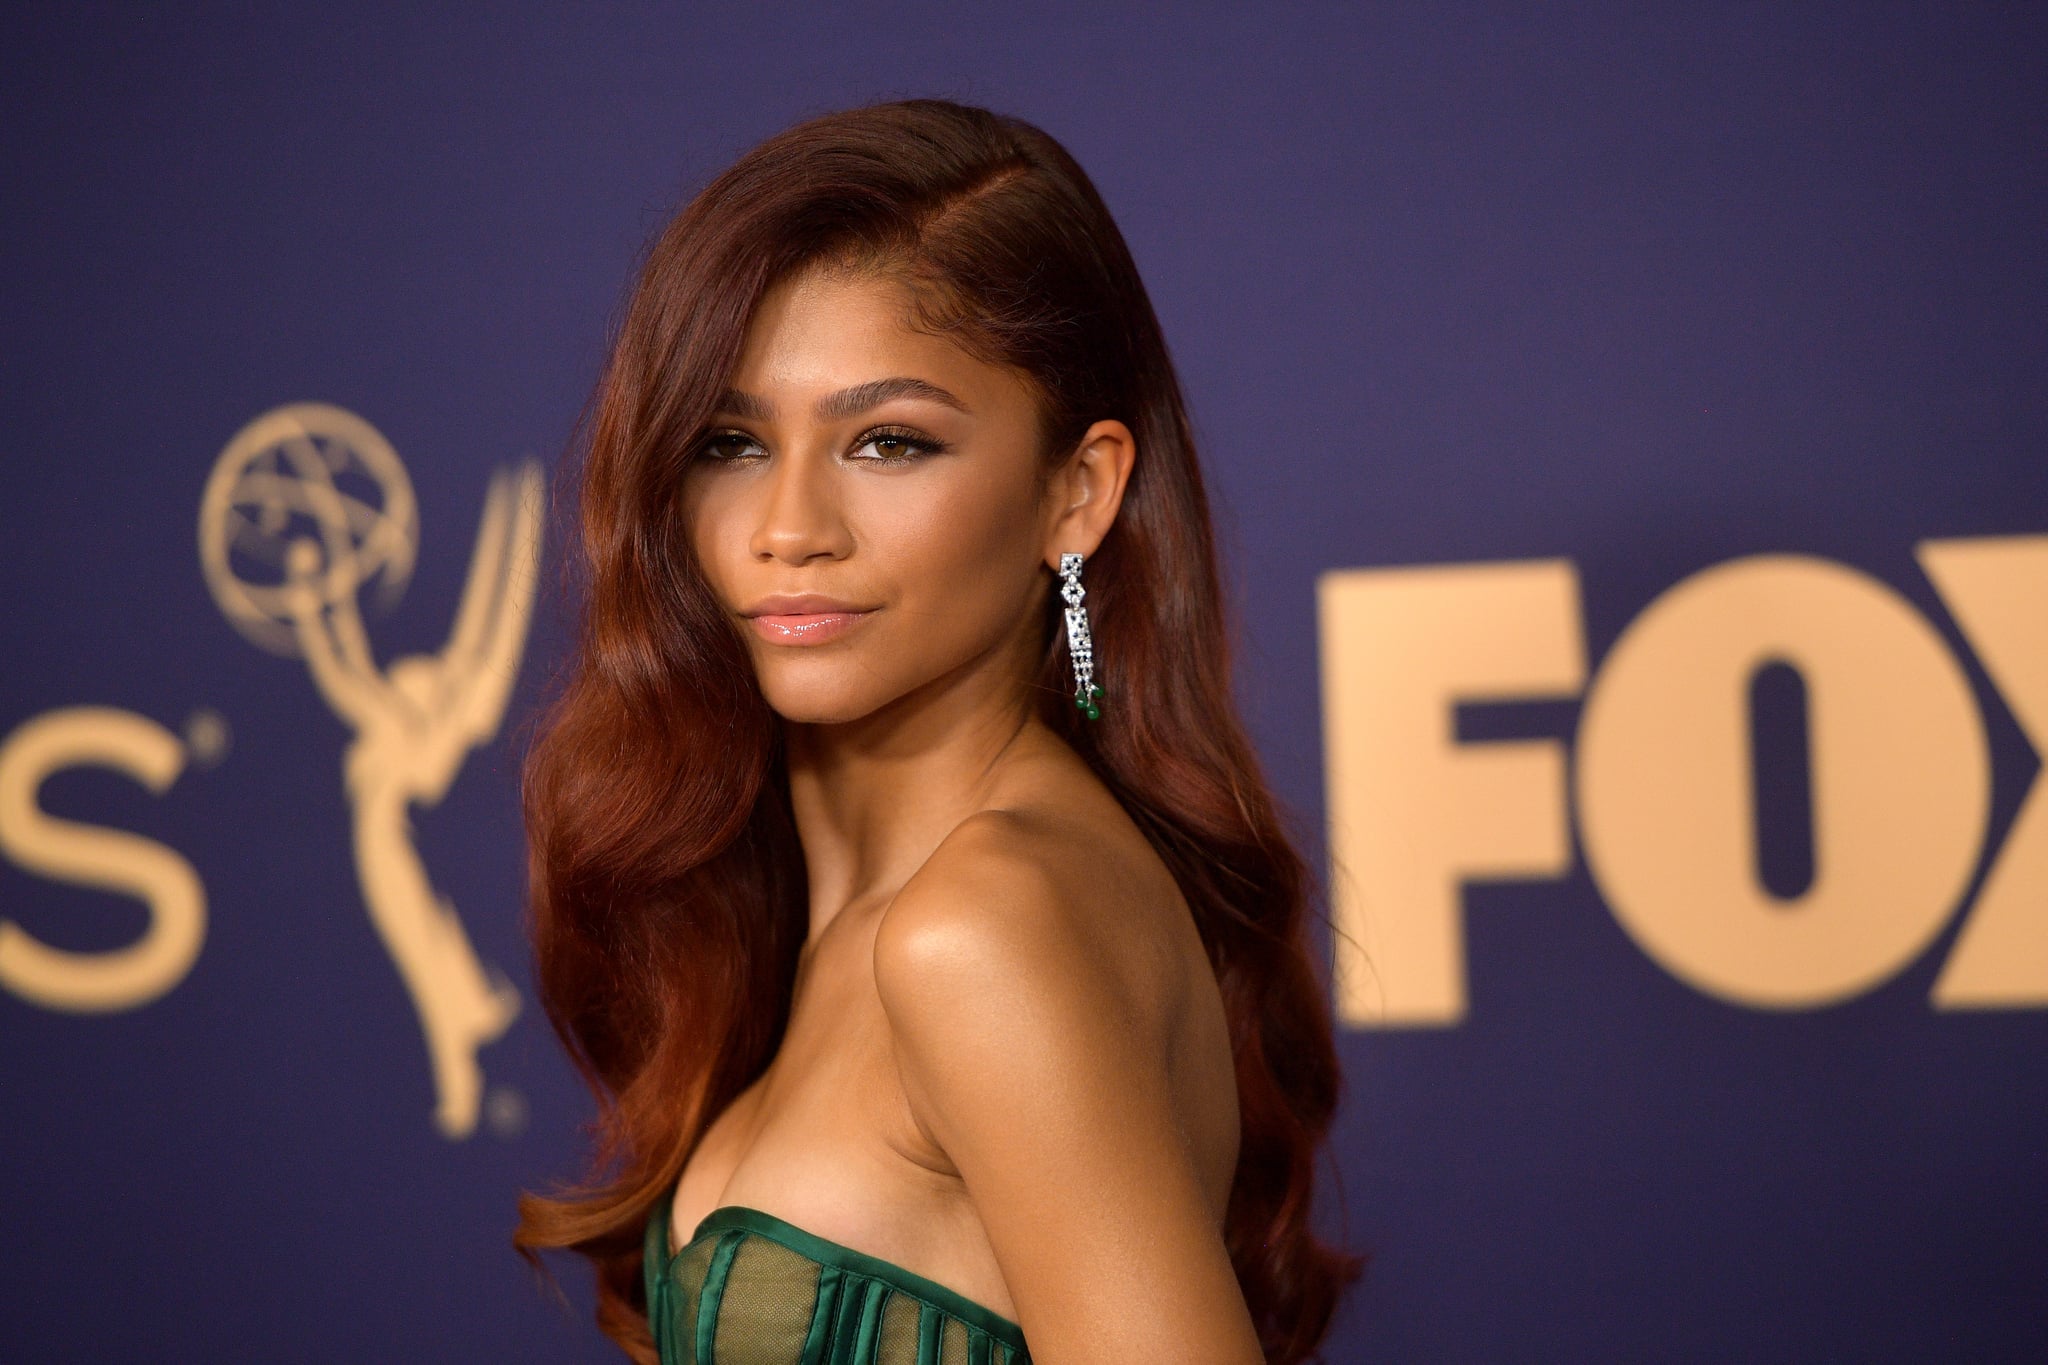 LOS ANGELES, CALIFORNIA - SEPTEMBER 22: Zendaya attends the 71st Emmy Awards at Microsoft Theatre on September 22, 2019 in Los Angeles, California. (Photo by Matt Winkelmeyer/Getty Images)